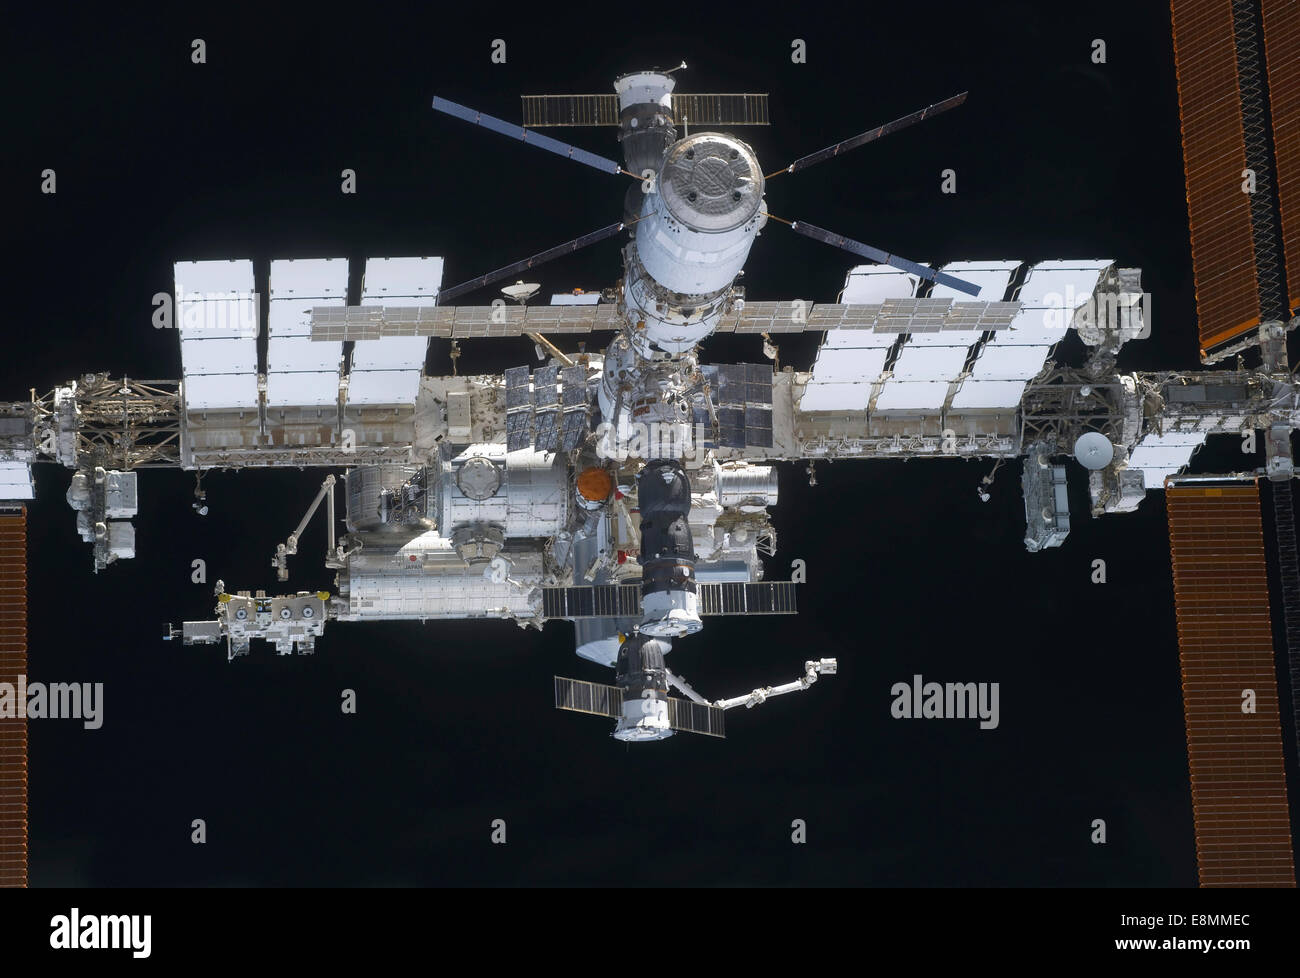 March 7, 2011 - A close-up view of the International Space Station. Stock Photo